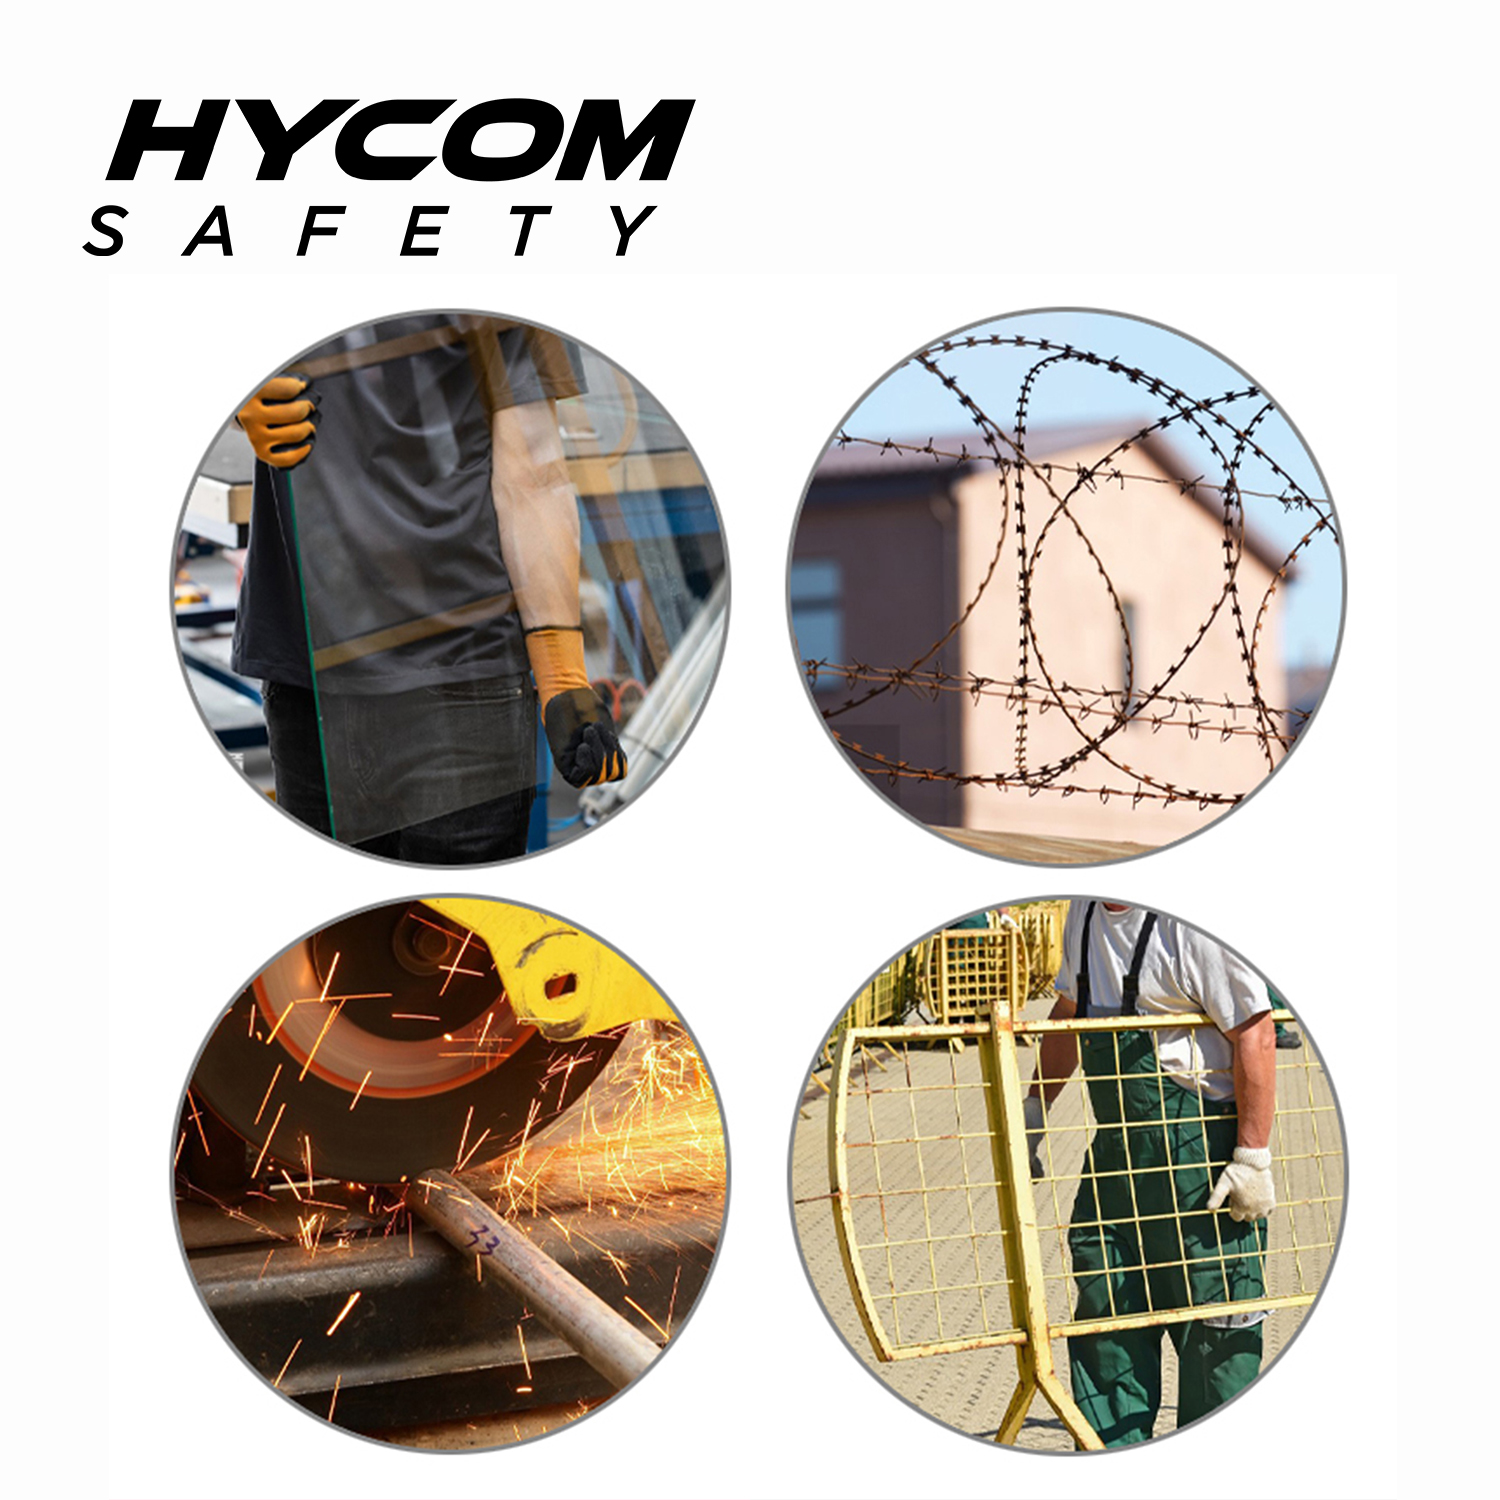 HYCOM ANSI 5 Cut Resistant Pullover Cloting with High Visible Reflective Tape And Thumb Hole PPE Clothing